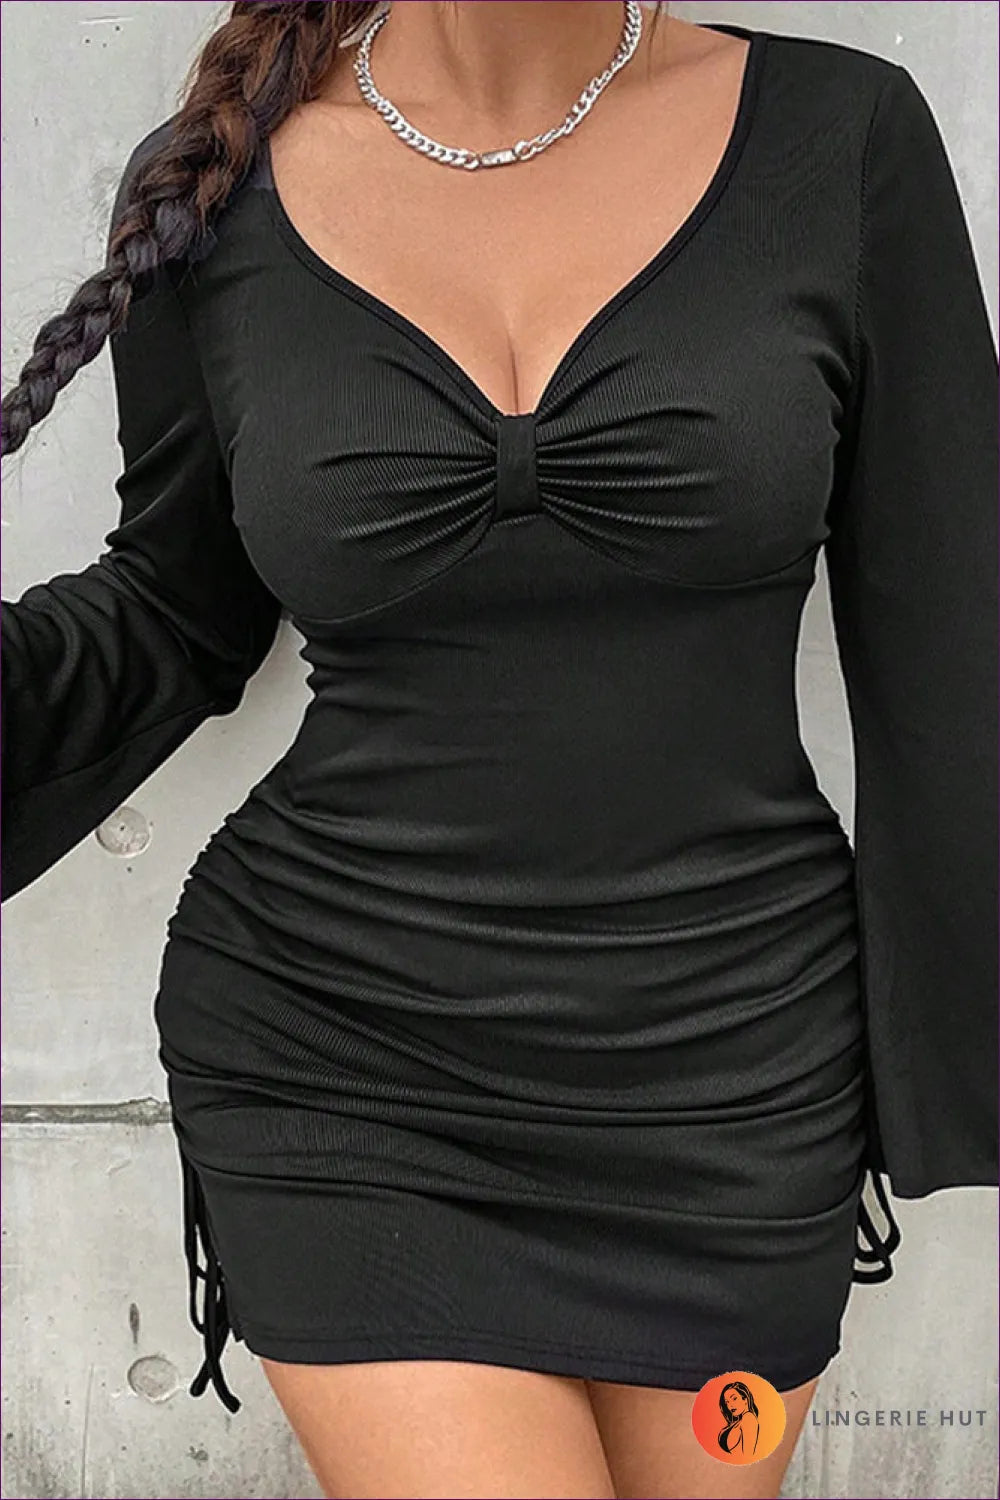 Wrap Yourself In The Plus Size V-neck Ruched Dress From Lingerie Hut. Perfect For Spring And Fall, This